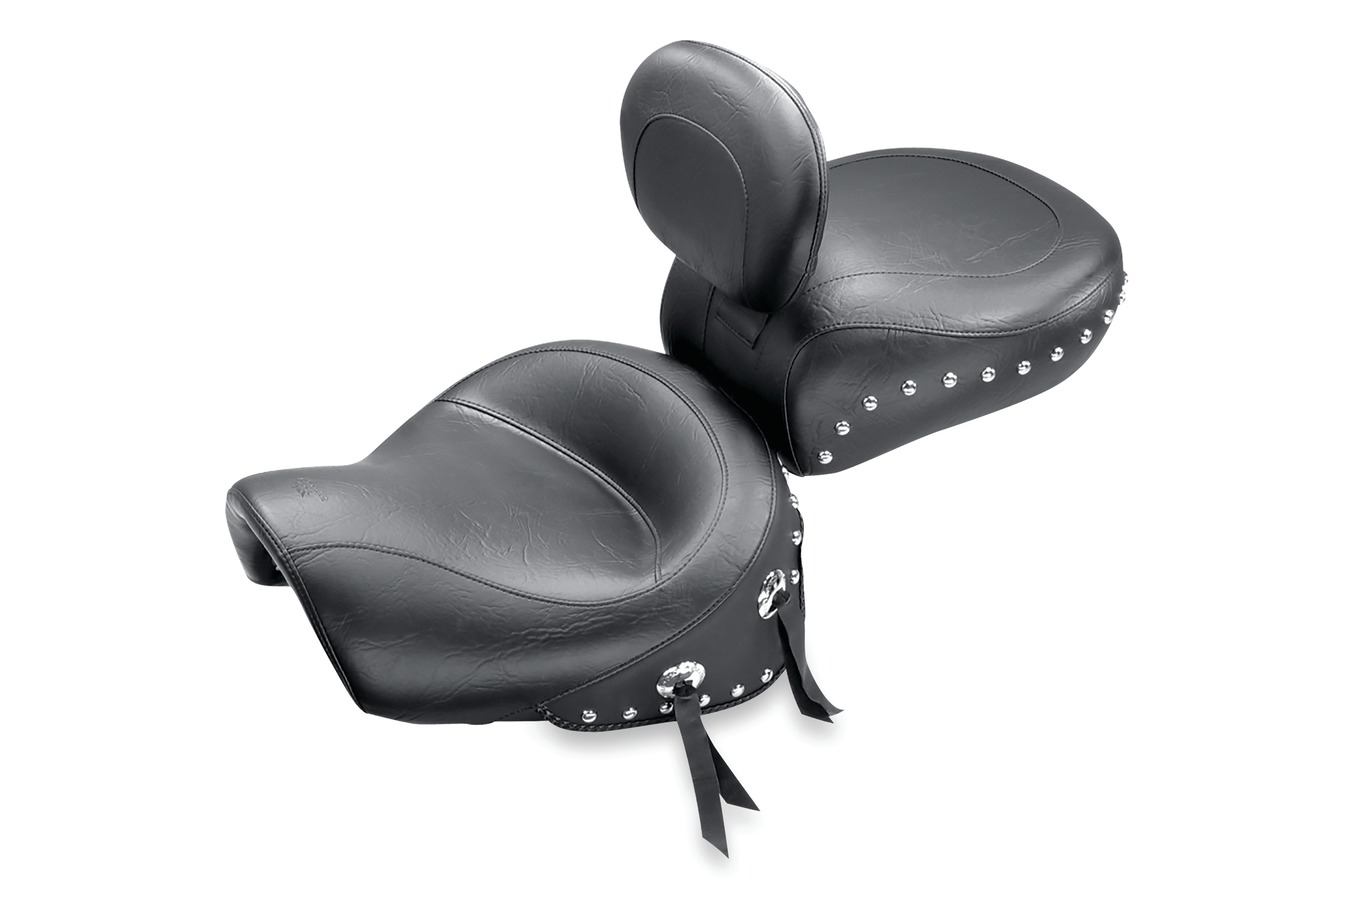 Standard Touring Two-Piece Seat with Driver Backrest for Kawasaki Vulcan 1500 Classic FI 2000-